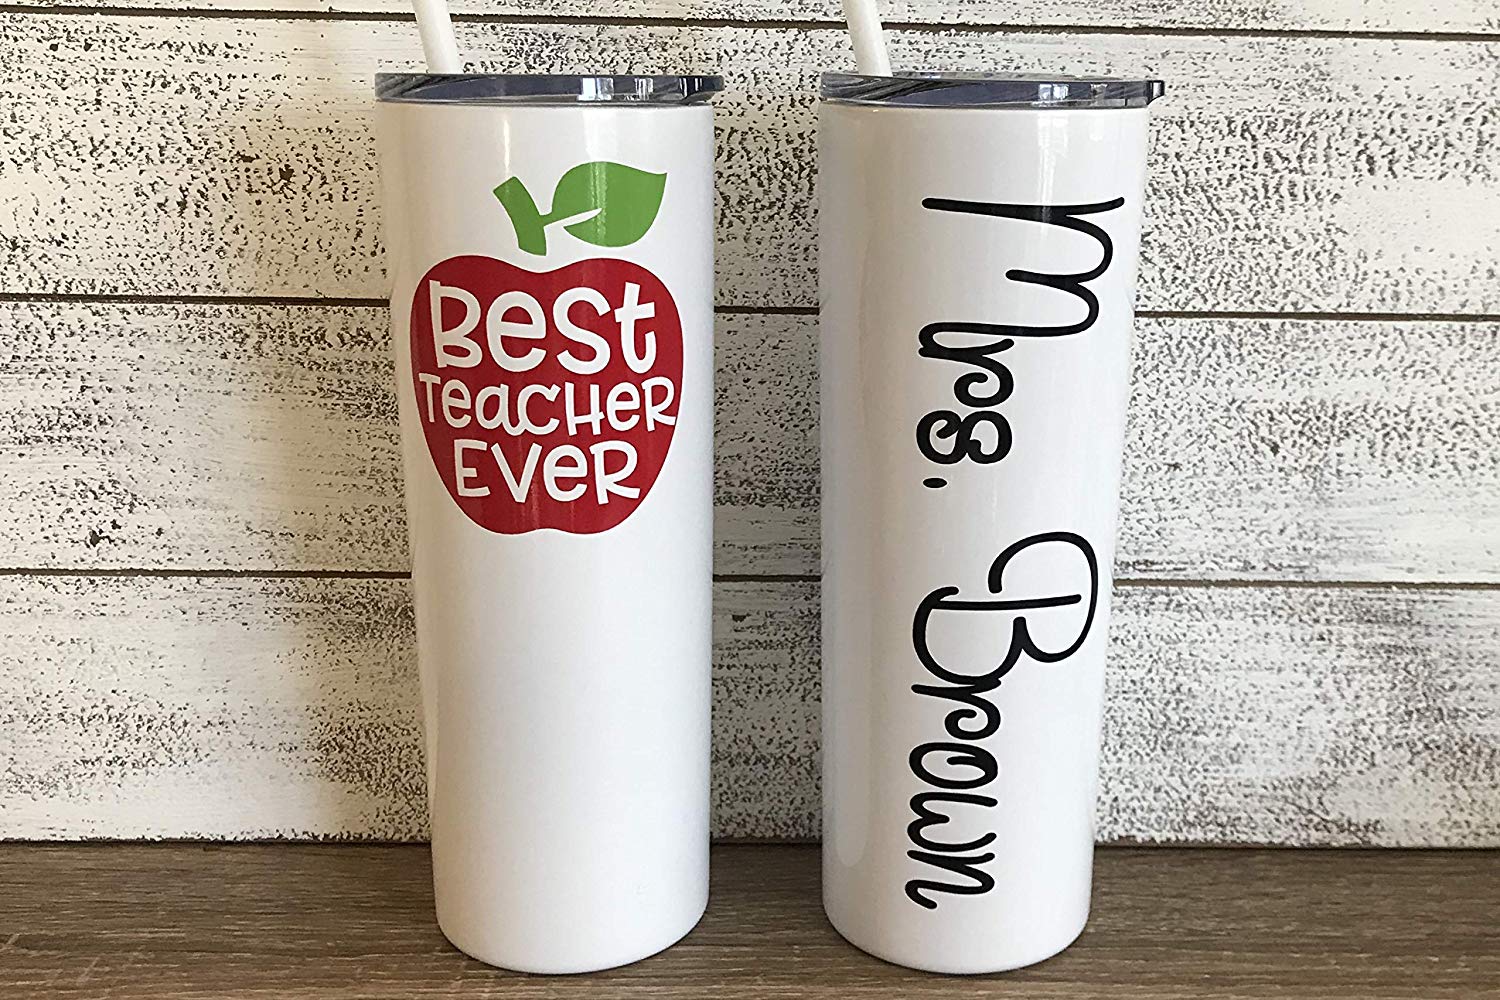 Best Teacher Ever Insulated Tumbler Cup 20 oz Clear Lid and Straw